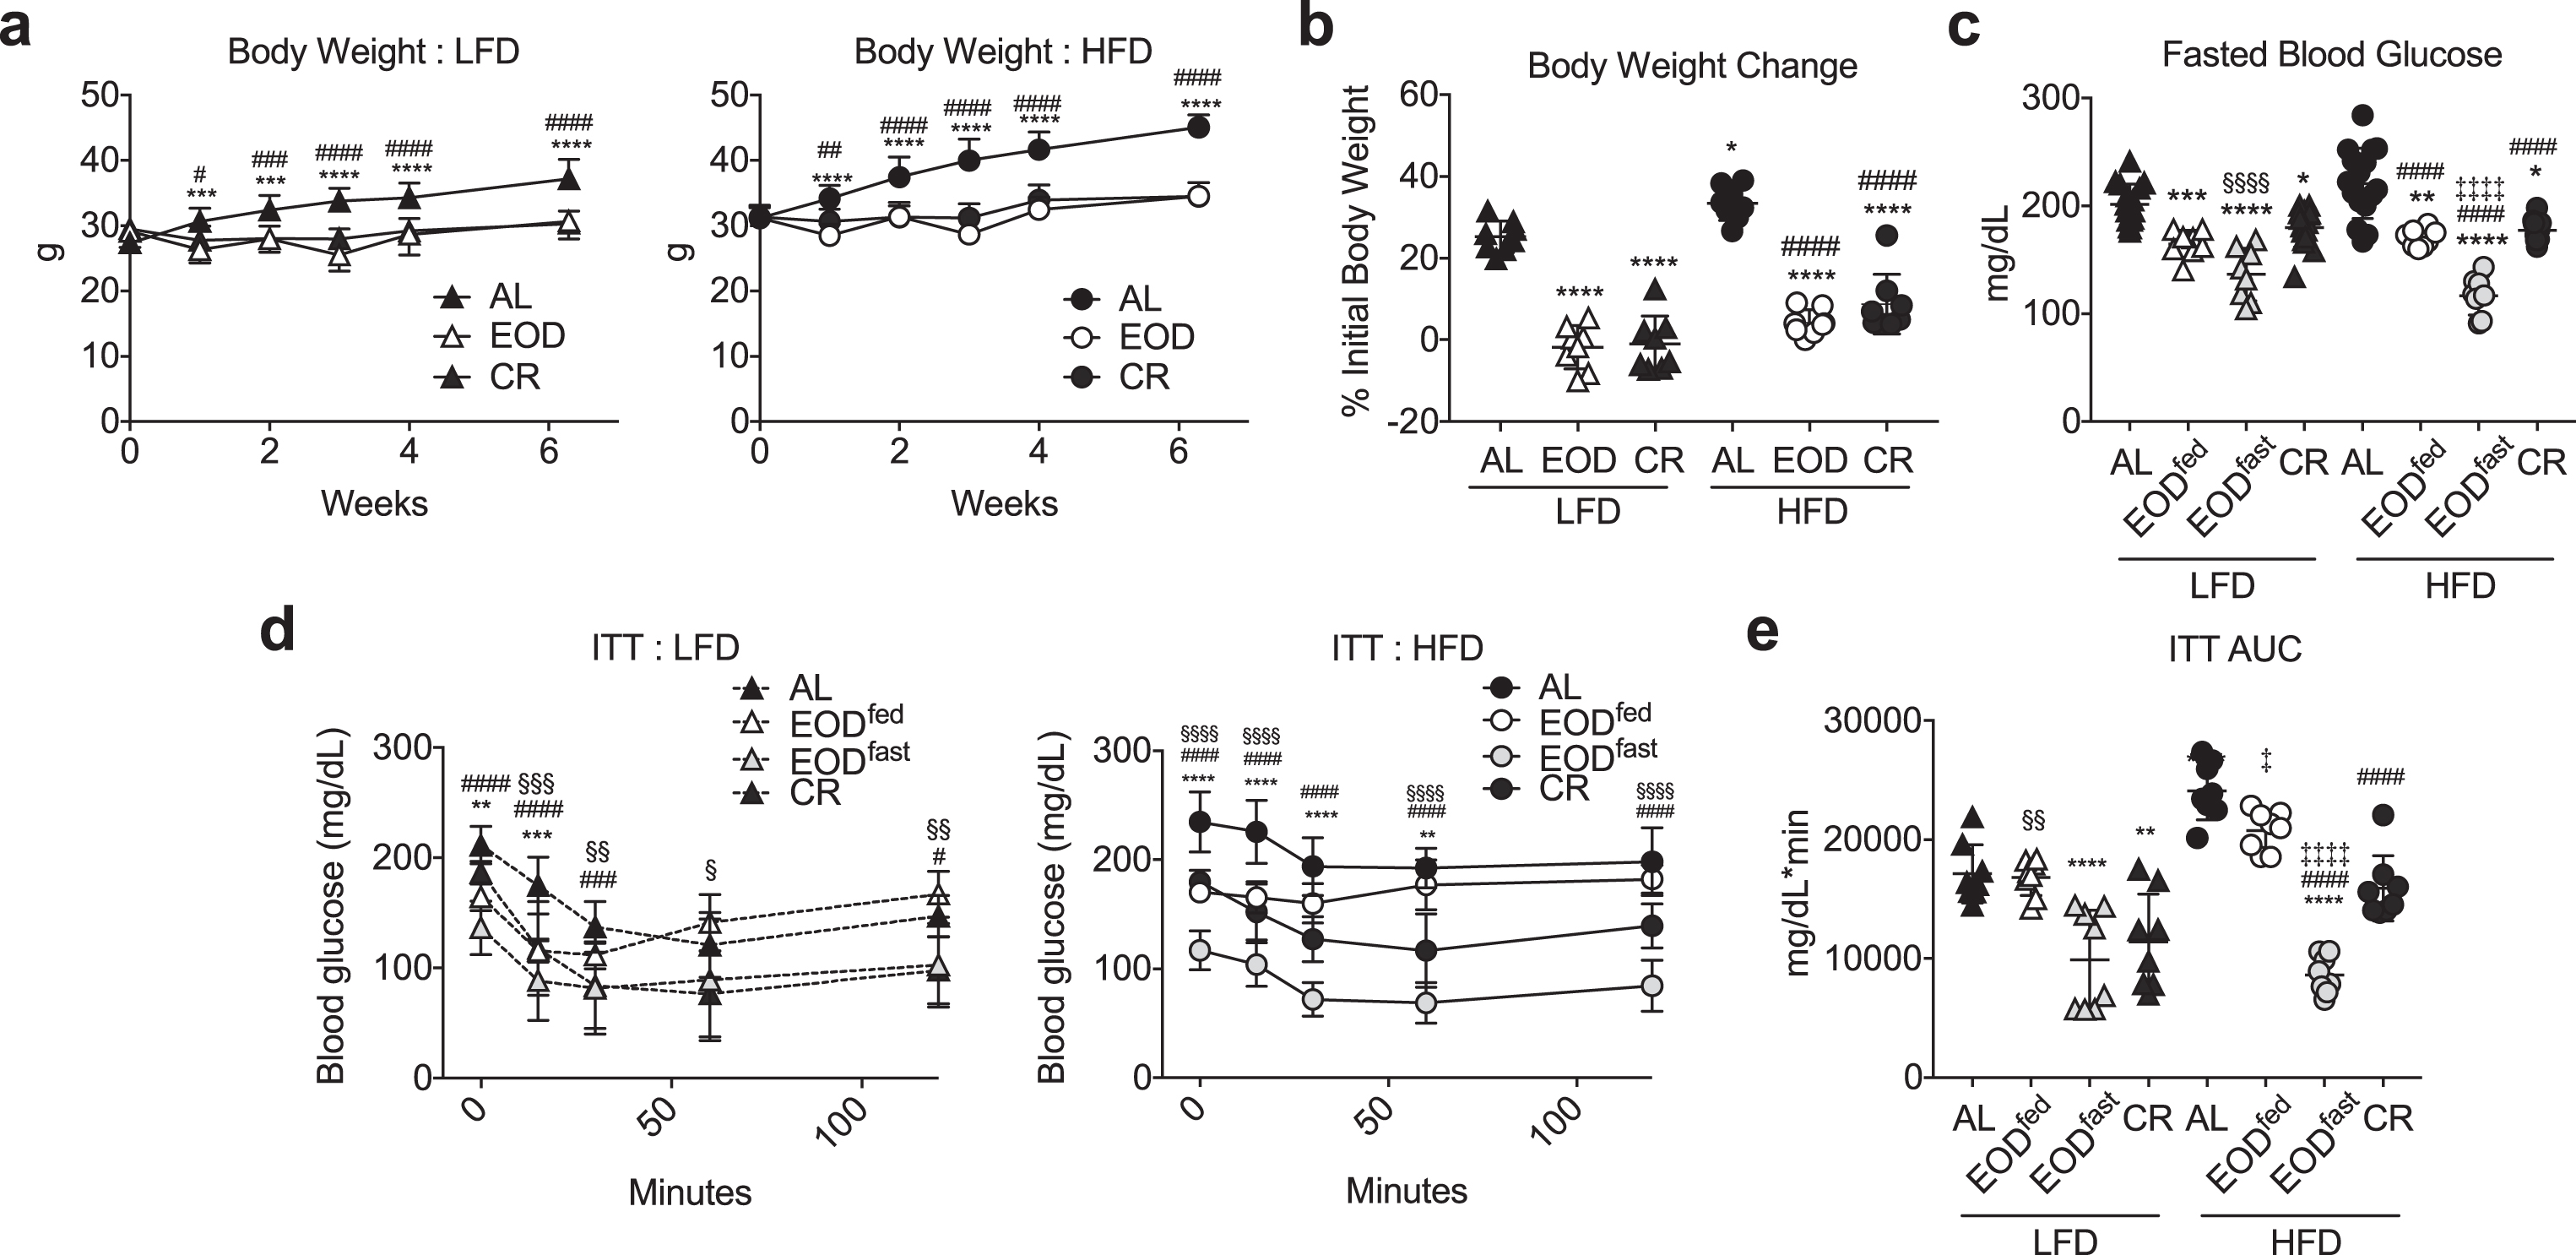 Effects of EOD fed or fasted day on glucose homeostasis. (a) Time-dependent changes in body weight over 6 weeks of the indicated dietary regimen on LFD (left) or HFD (right). Asterisk: AL vs. EOD; pound sign: AL vs. CR within diet group using repeated measures two-way ANOVA with a Dunnett’s post-hoc test. (b) Final body weight expressed as a percent change of initial body weight. Asterisk: comparison of all groups to AL LFD; pound sign: comparison of HFD groups to AL HFD using one-way ANOVA with a Sidak’s post-hoc test; (c) Fasted blood glucose following the indicated dietary interventions, with EOD groups assessed after fed or fasting days as indicated. (d, e) Insulin tolerance test. Time-dependent changes in blood glucose (d: LFD left, HFD right) and AUC (e) following a bolus injection of insulin to animals on the indicated diets for 6 weeks. (d) Asterisk: AL vs. EODfed; pound sign: AL vs. EODfast; squiggle: AL vs. CR, using repeated measures two-way ANOVA within diet with a Dunnett’s post-hoc test. (c, e) Asterisk: comparison of all groups to AL LFD; pound sign: comparison of HFD groups to AL HFD; squiggle: comparison between EOD groups and CR within LFD; double cross: comparison between EOD groups and CR within HFD using one-way ANOVA with a Sidak’s post-hoc test; */#/‡/§P < 0.05, **/# #/‡‡/§§P < 0.01, ***/# # #/‡‡‡/§§§P < 0.001, ****/# # # #/‡‡‡‡/§§§§P < 0.0001. All data are expressed as mean±SD.